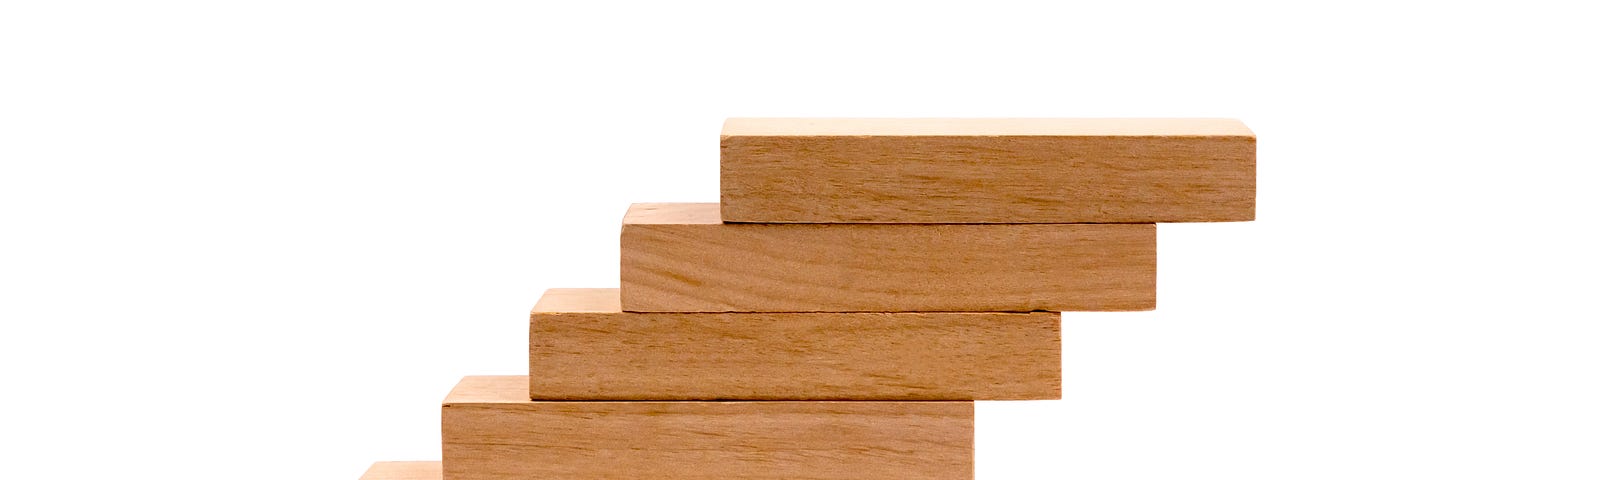 A stack of wooden blocks that may become unbalanced